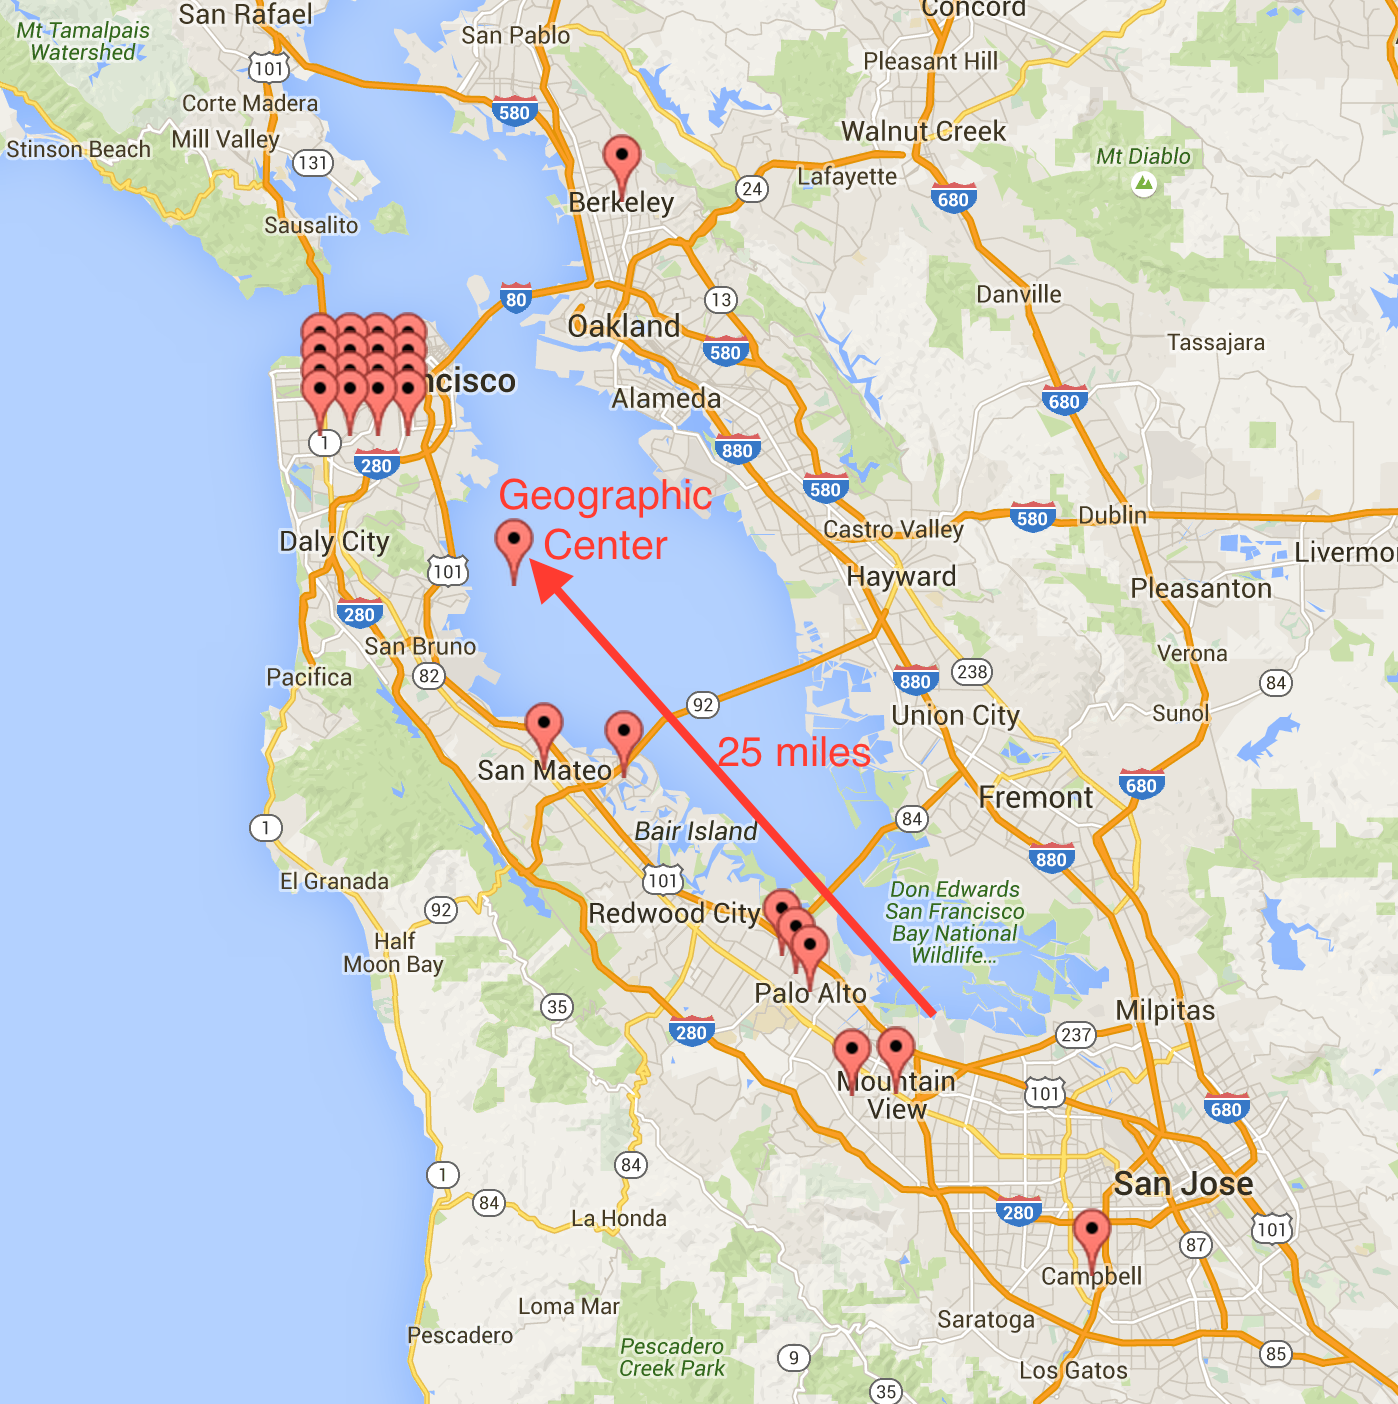 silicon valley location map Uncategorized Amplab Uc Berkeley Page 3 silicon valley location map